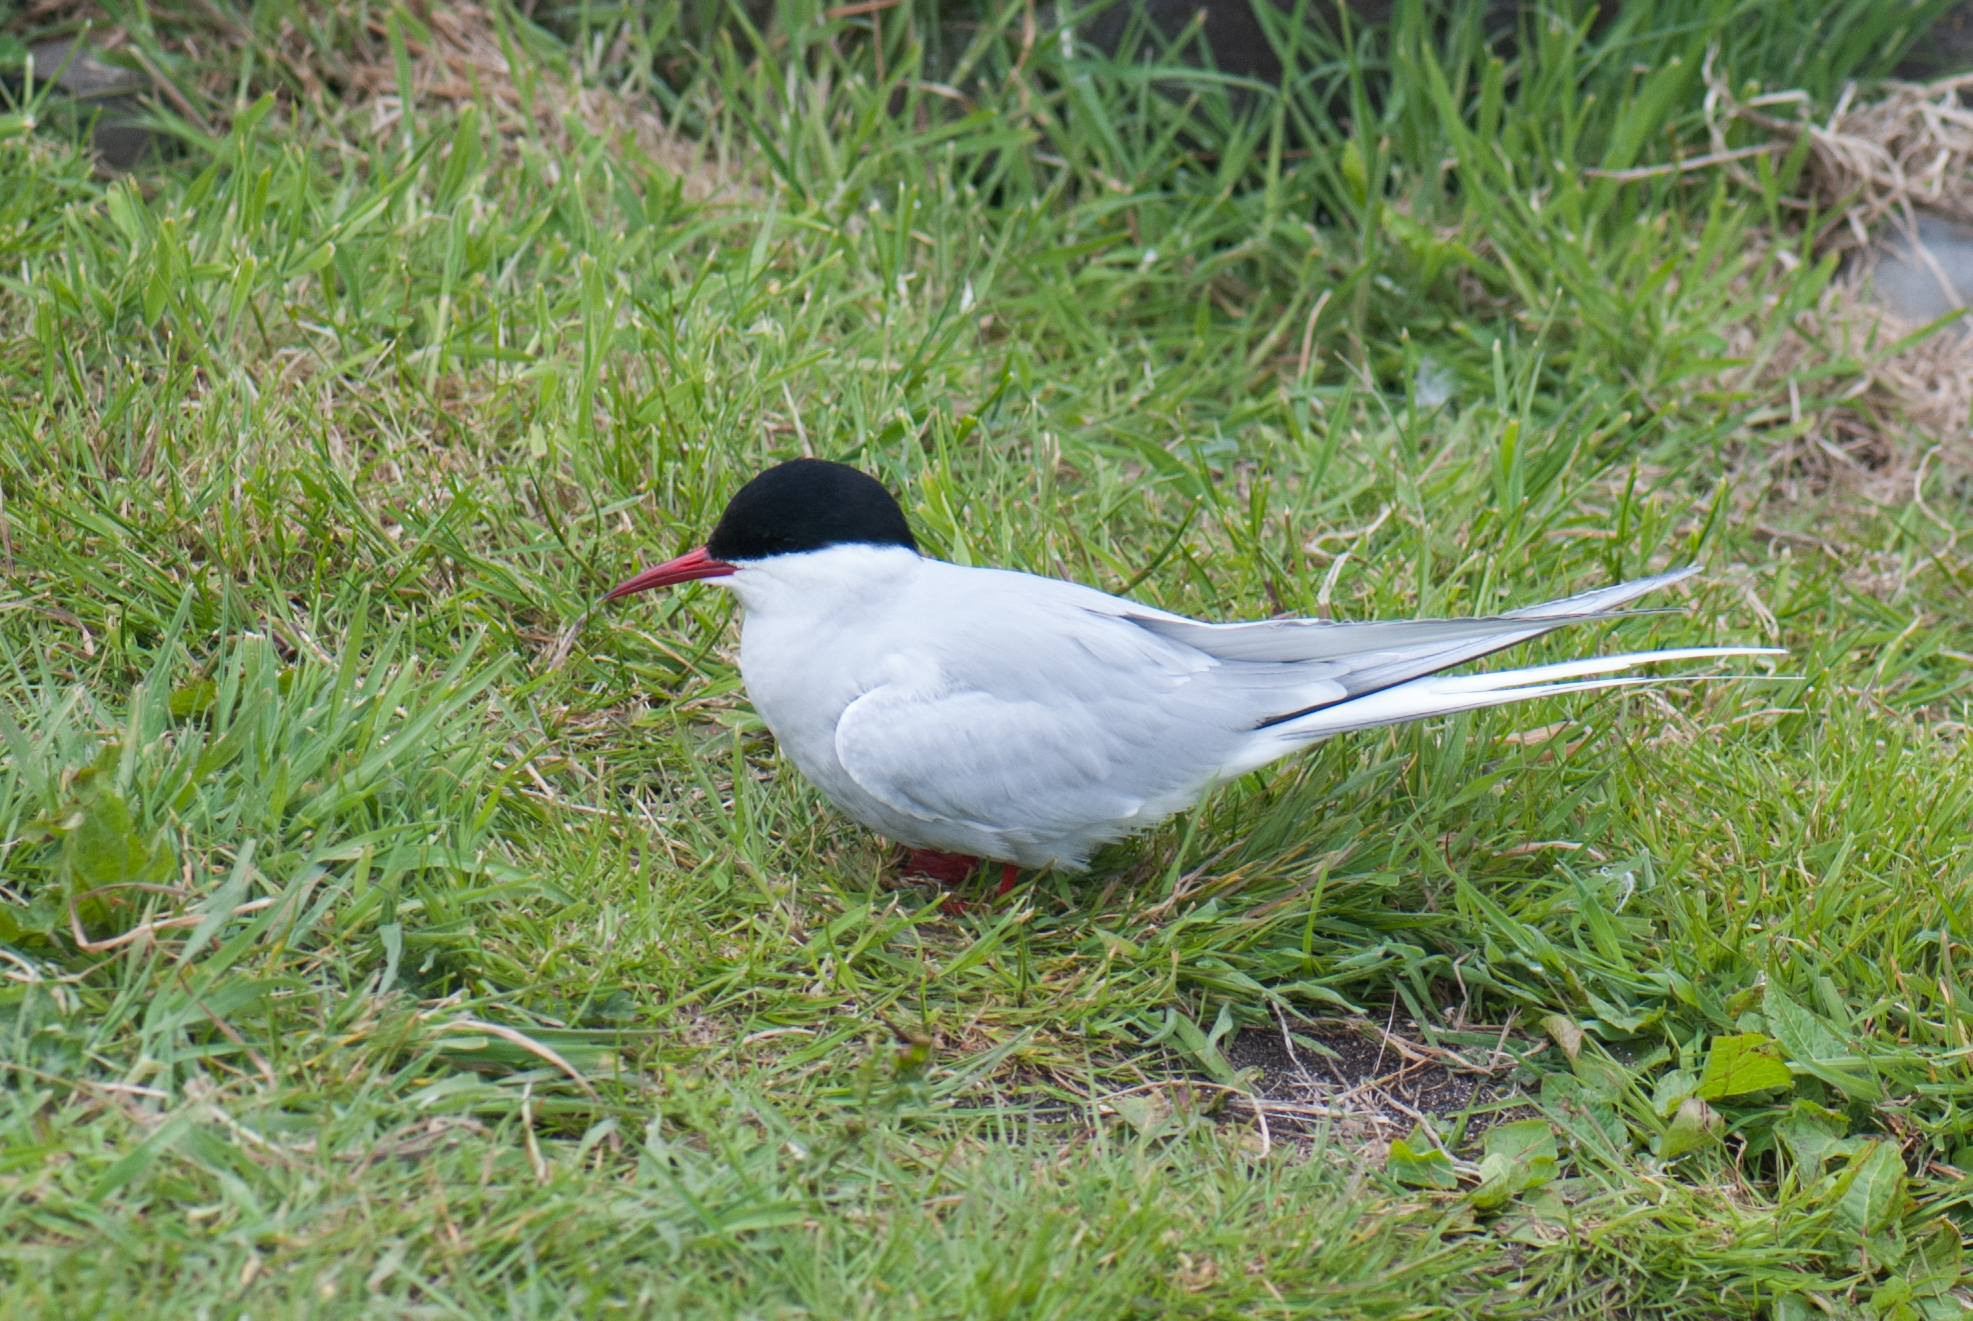 a white and black bird is walking in some grass